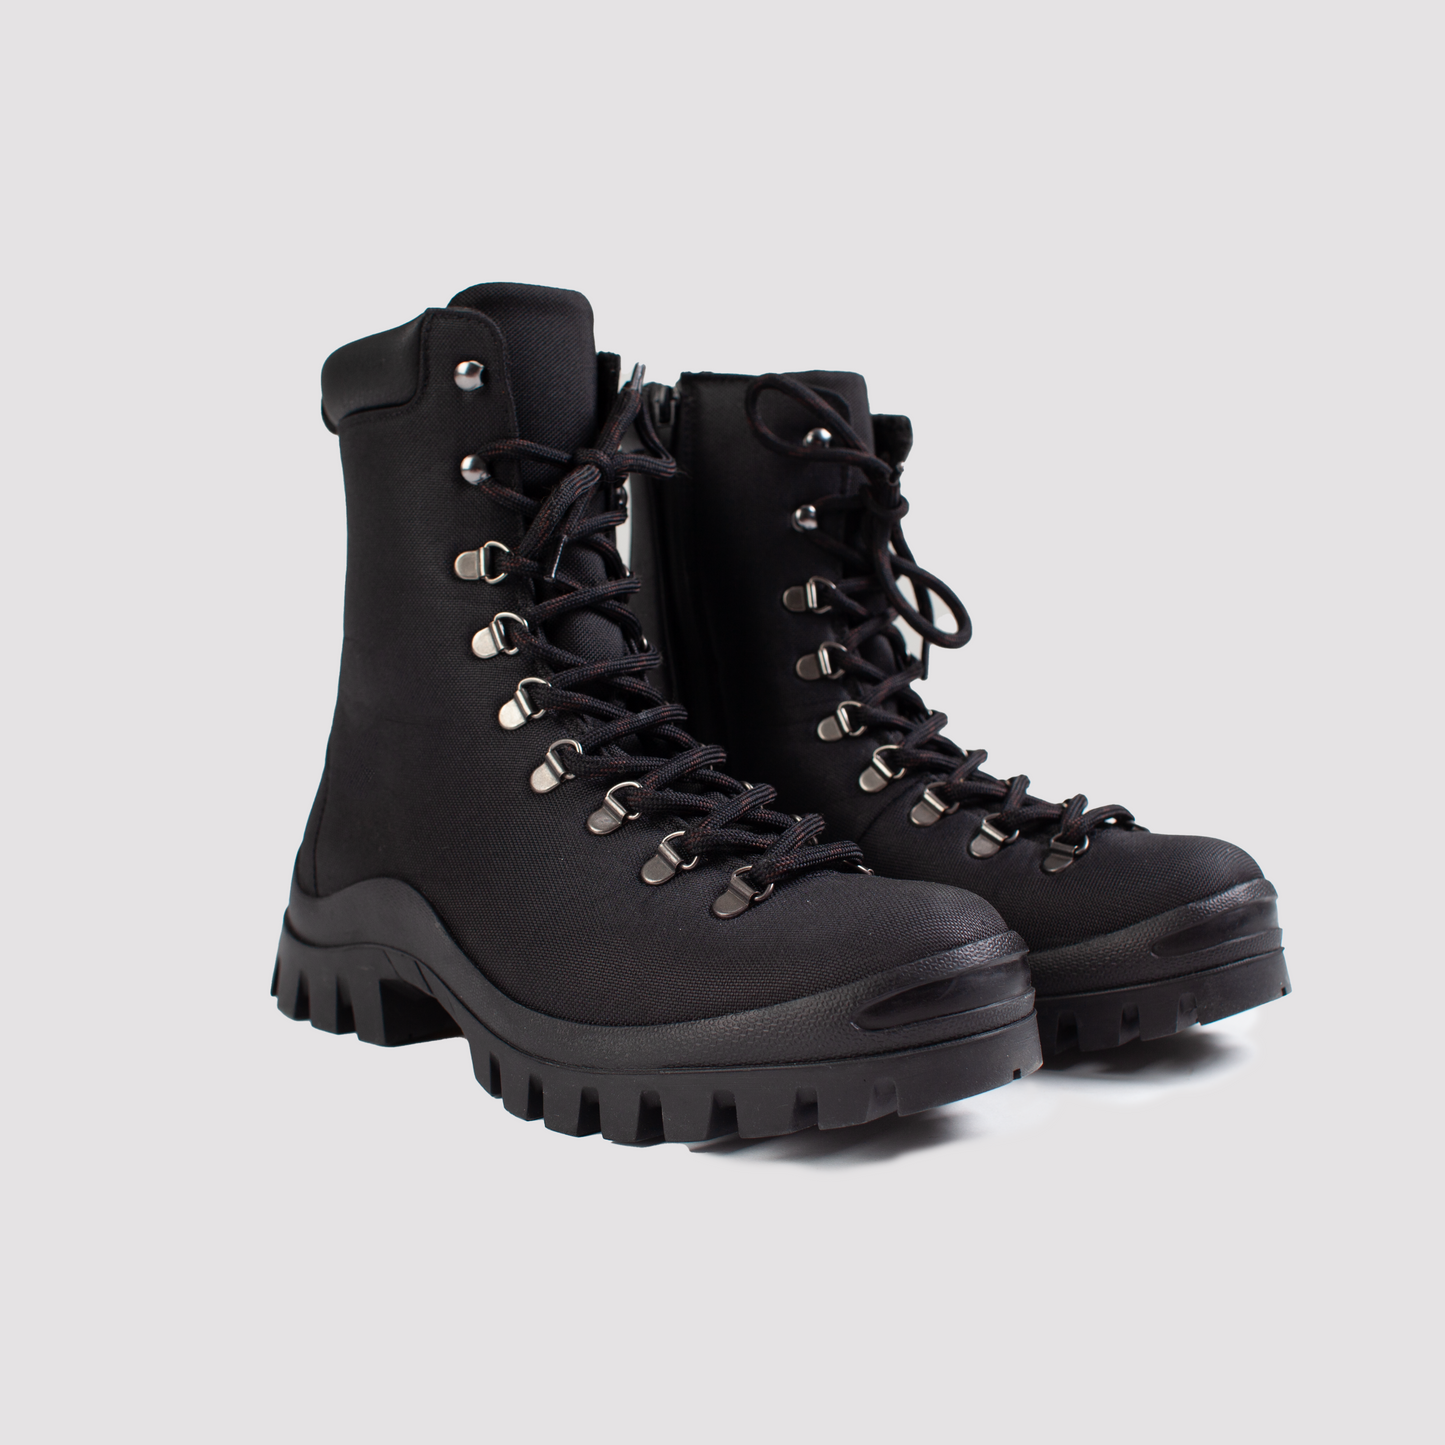 The Modern Winter Boot in Black